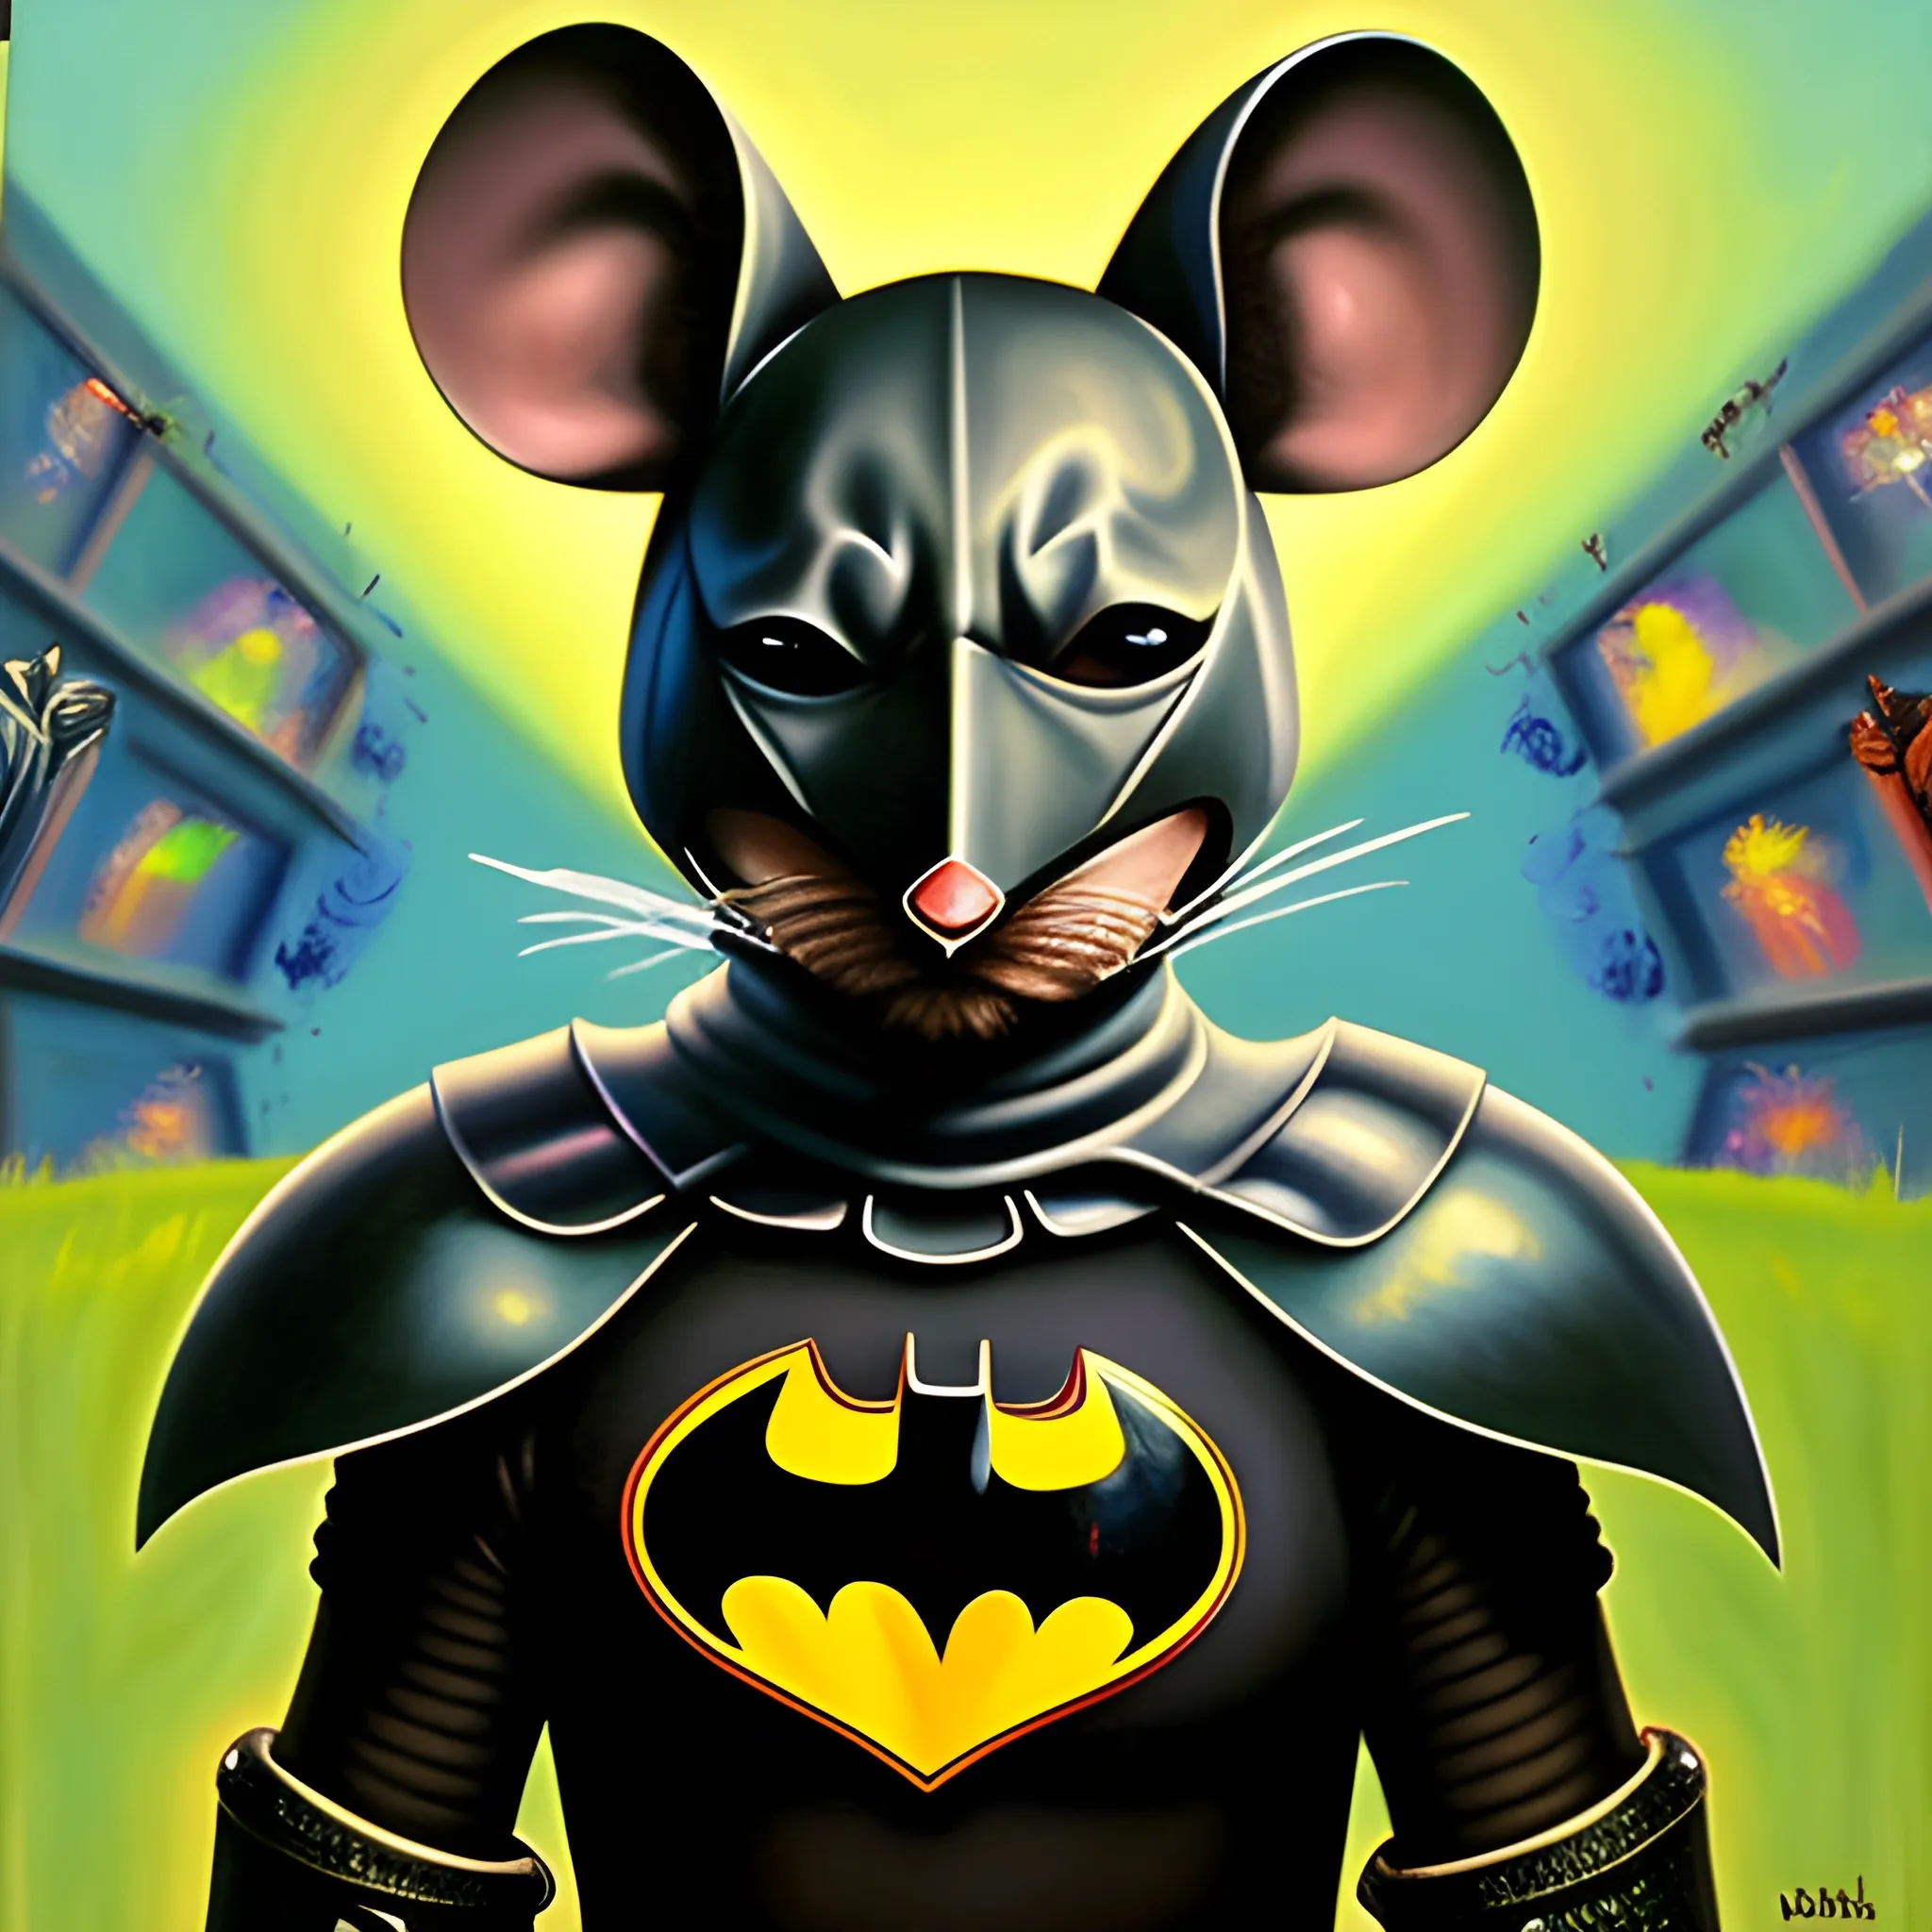 General Mouse is wearing armor. , Oil Painting, Trippy，Just like Batman